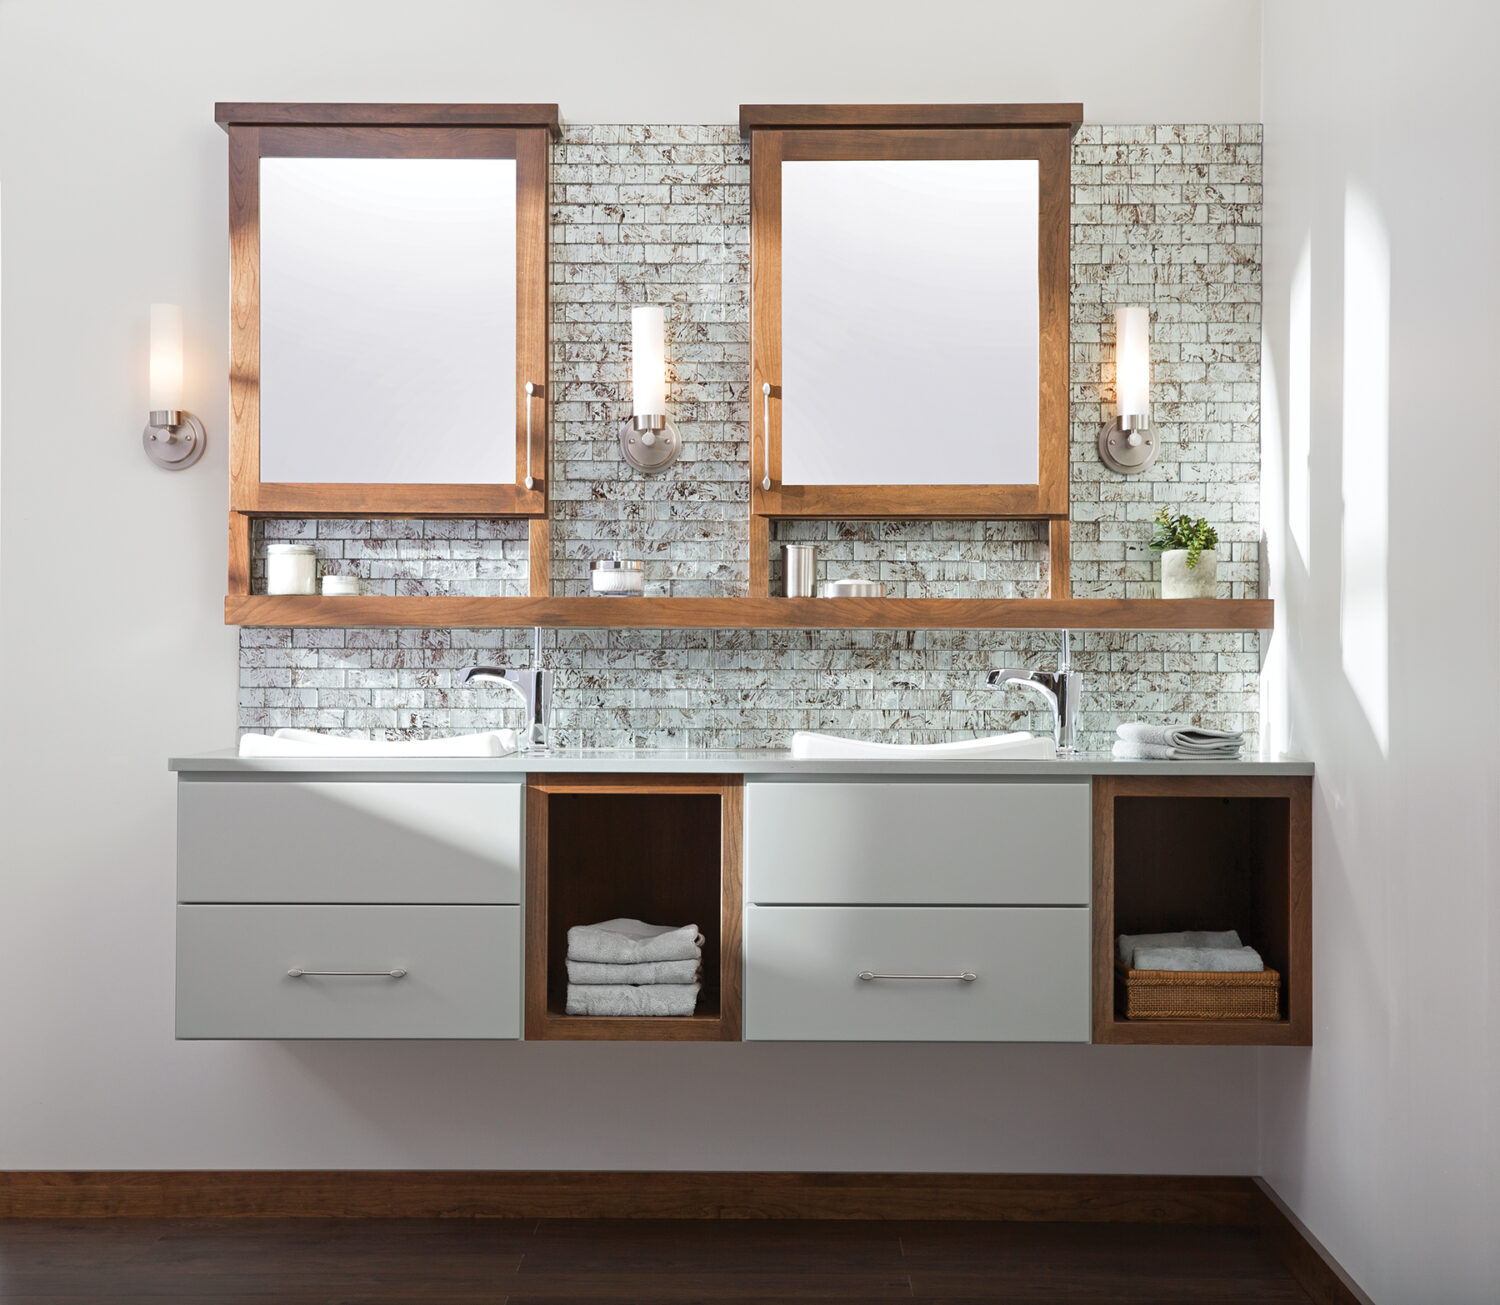 This contemporay bathroom design has a modern style with a floating vanity with dual sets of suspended drawers and two open cabinets for bathroom linens and towels. The double medicine cabinetd with a connecting floating shelf has sleek, streamlined look and adds ti the style of the room.The Dura Supreme cabinetry is shown in a custom matte gray paint accented by medium stain on Cherry wood.